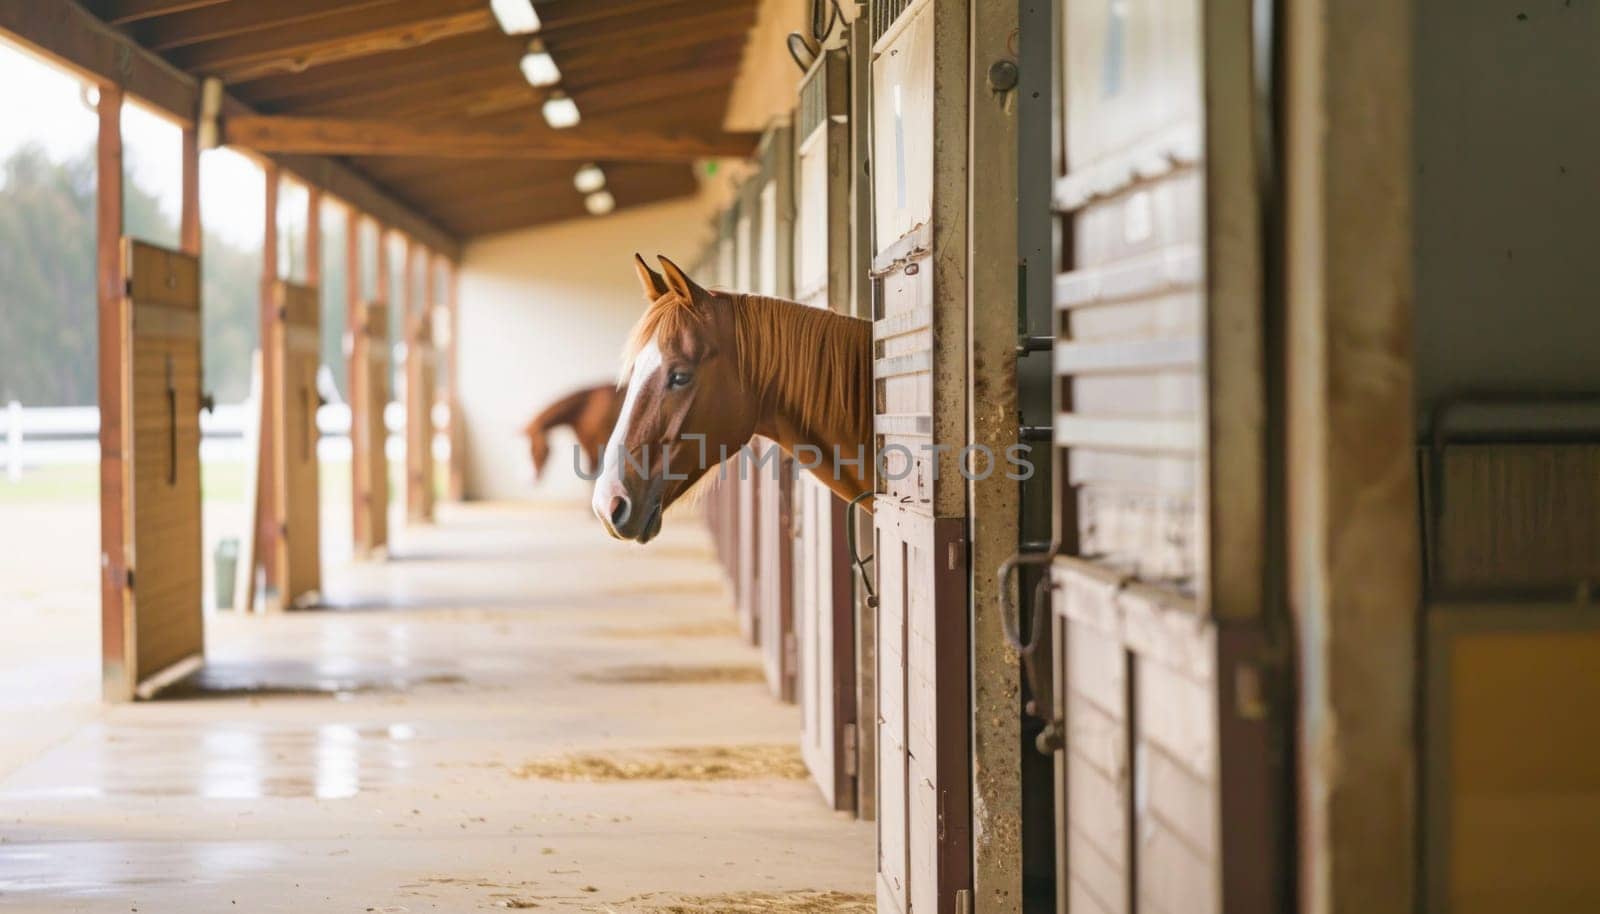 A curious horse peers through the stable door, observing the surroundings outside as it stands in the stable